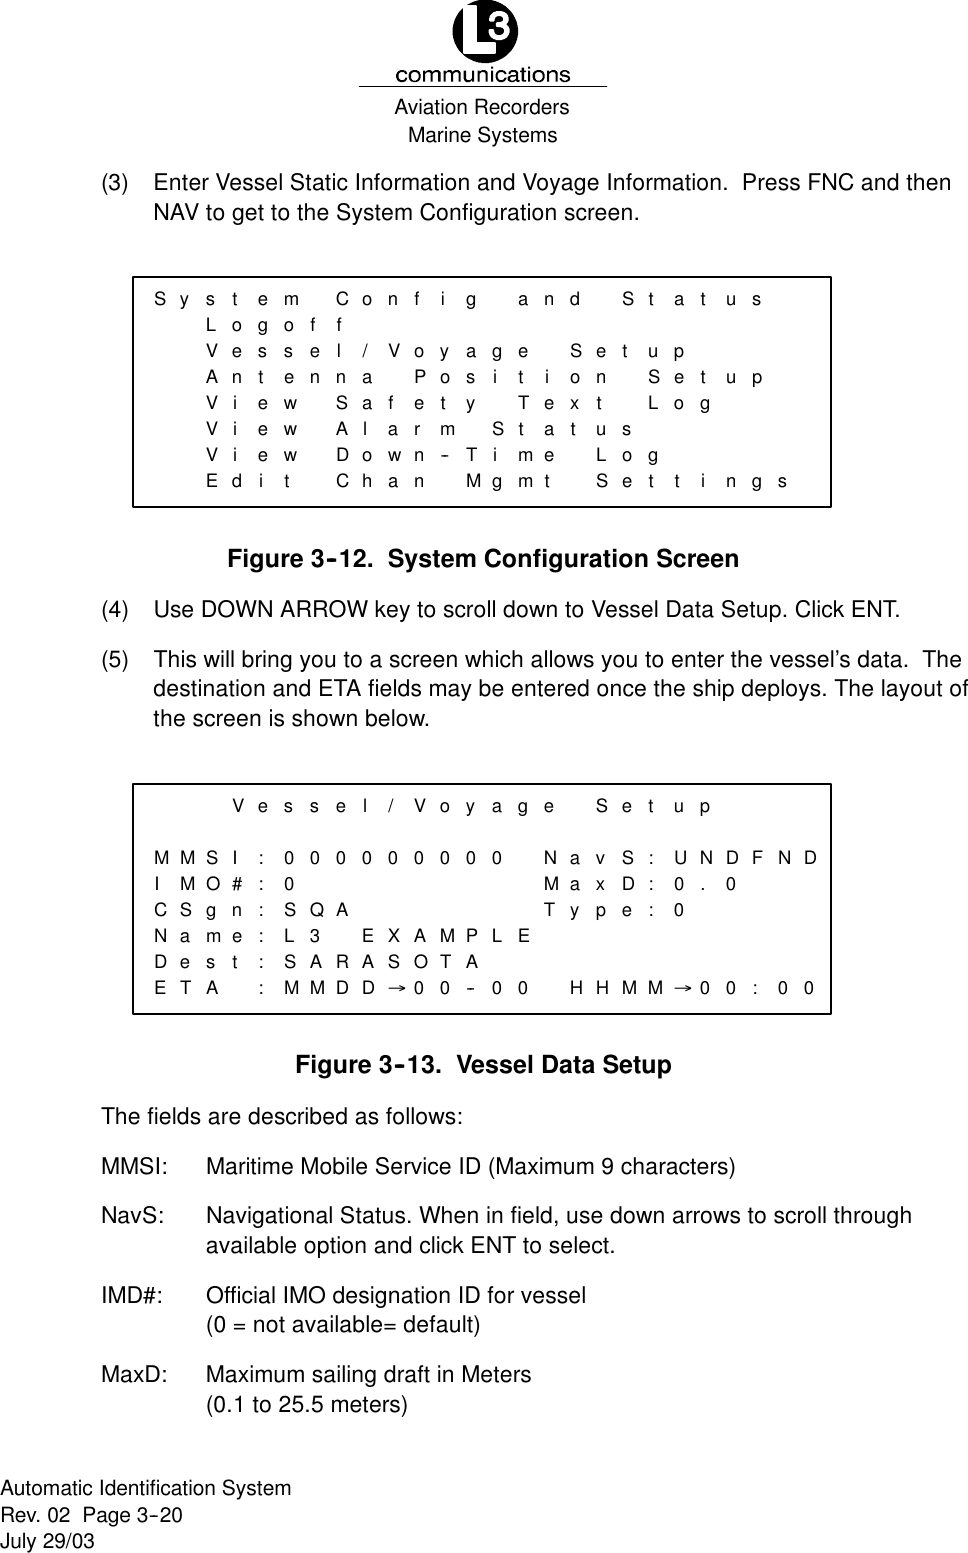 Marine SystemsAviation RecordersRev. 02 Page 3--20July 29/03Automatic Identification System(3) Enter Vessel Static Information and Voyage Information. Press FNC and thenNAV to get to the System Configuration screen.Sy s tLoVeAnViViViEdemgoCffssteelnnewewSAewitDConf i/VaoyPoaflaetrmowhan--ngasyTMandgeitSioTStexatimgmetSt aetnupSetusLoLoSegtttustupgi ngsFigure 3--12. System Configuration Screen(4) Use DOWN ARROW key to scroll down to Vessel Data Setup. Click ENT.(5) This will bring you to a screen which allows you to enter the vessel’s data. Thedestination and ETA fields may be entered once the ship deploys. The layout ofthe screen is shown below.VMMIMSIO#CSNagnmeDeETstAesse:0:000:S:LQA3:S:MARMDl/Vo0000EXAMASD®OT00y0PA--age0NaMaLETy00 HSet uvSxD:U:0pe: 0HMM®pND.0FN00: 0D0Figure 3--13. Vessel Data SetupThe fields are described as follows:MMSI: Maritime Mobile Service ID (Maximum 9 characters)NavS: Navigational Status. When in field, use down arrows to scroll throughavailable option and click ENT to select.IMD#: Official IMO designation ID for vessel(0 = not available= default)MaxD: Maximum sailing draft in Meters(0.1 to 25.5 meters)